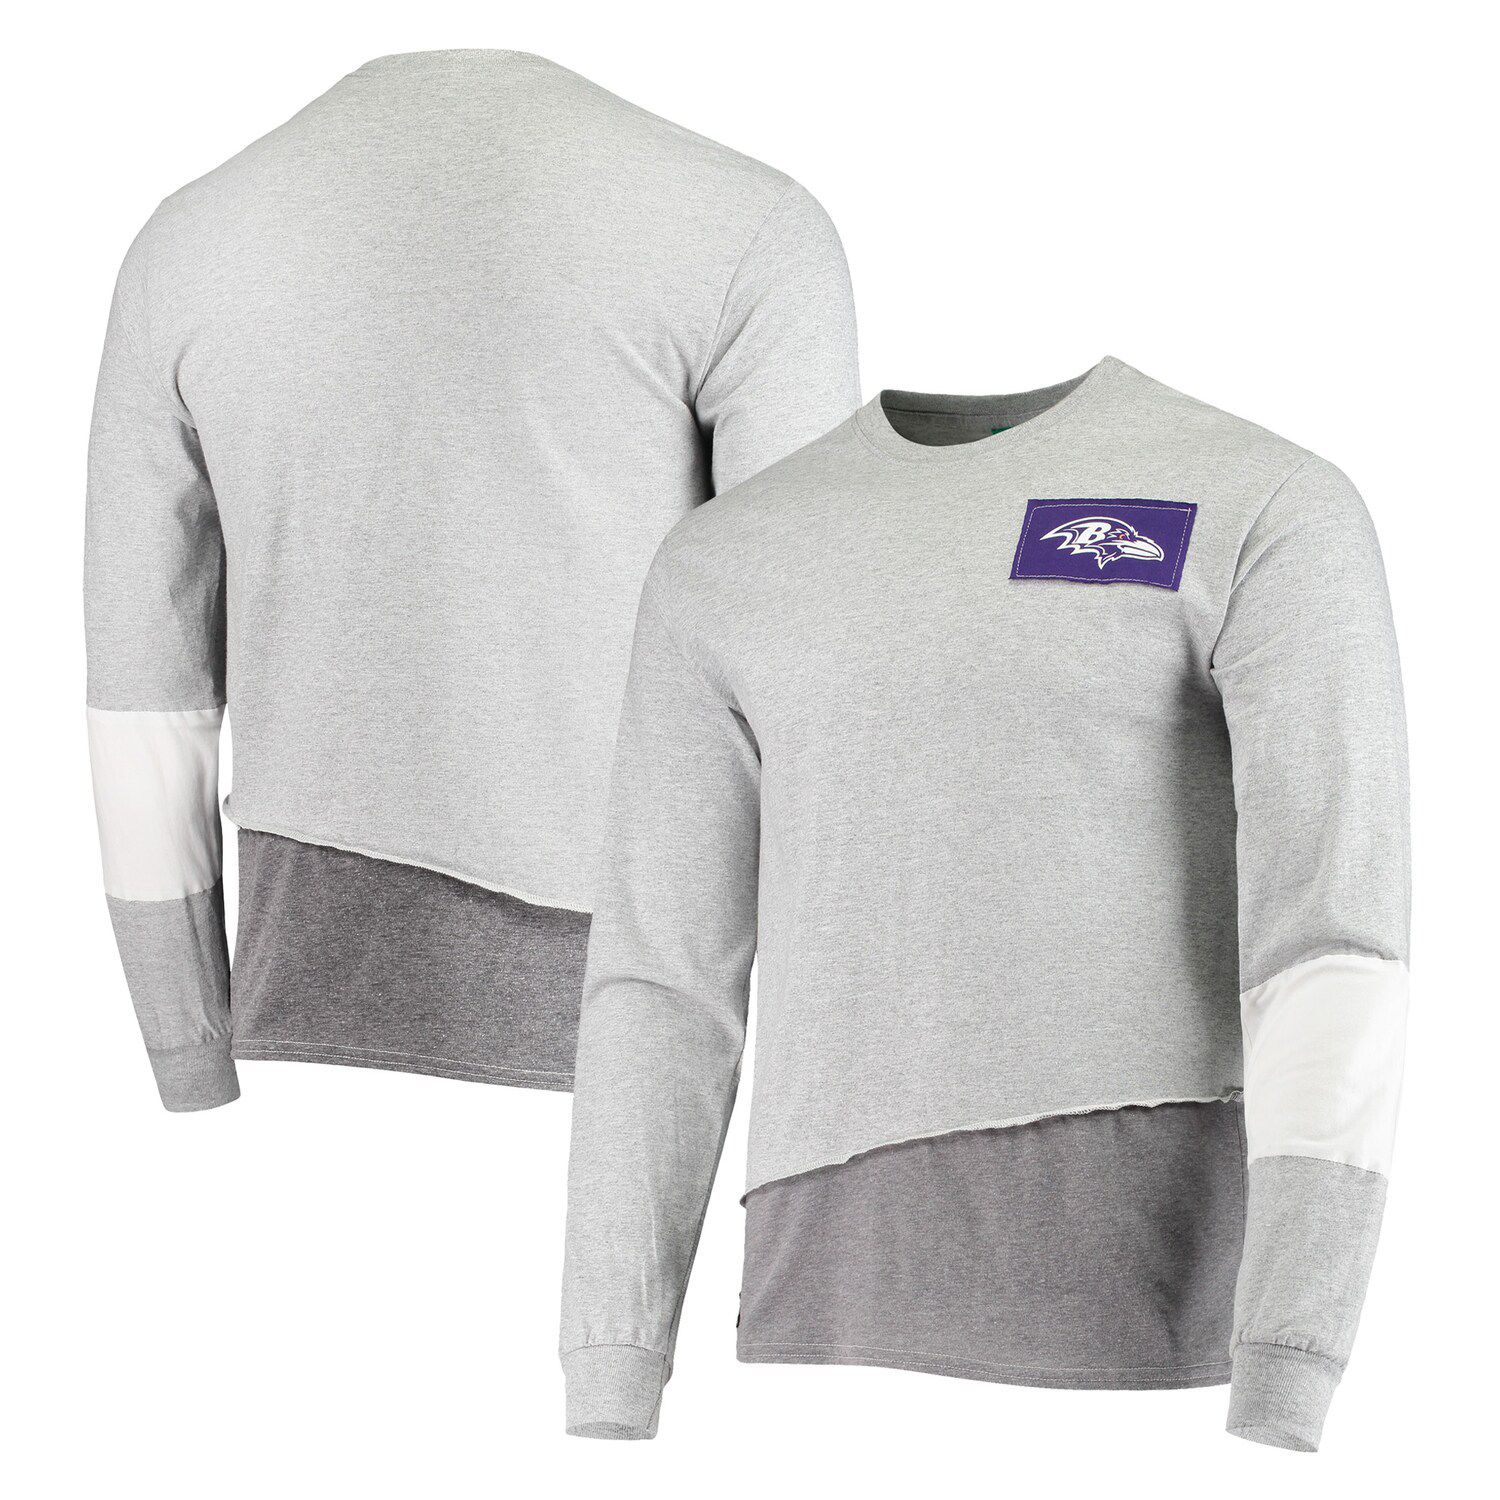 Image for Unbranded Men's Refried Apparel Gray Baltimore Ravens Angle Long Sleeve T-Shirt at Kohl's.